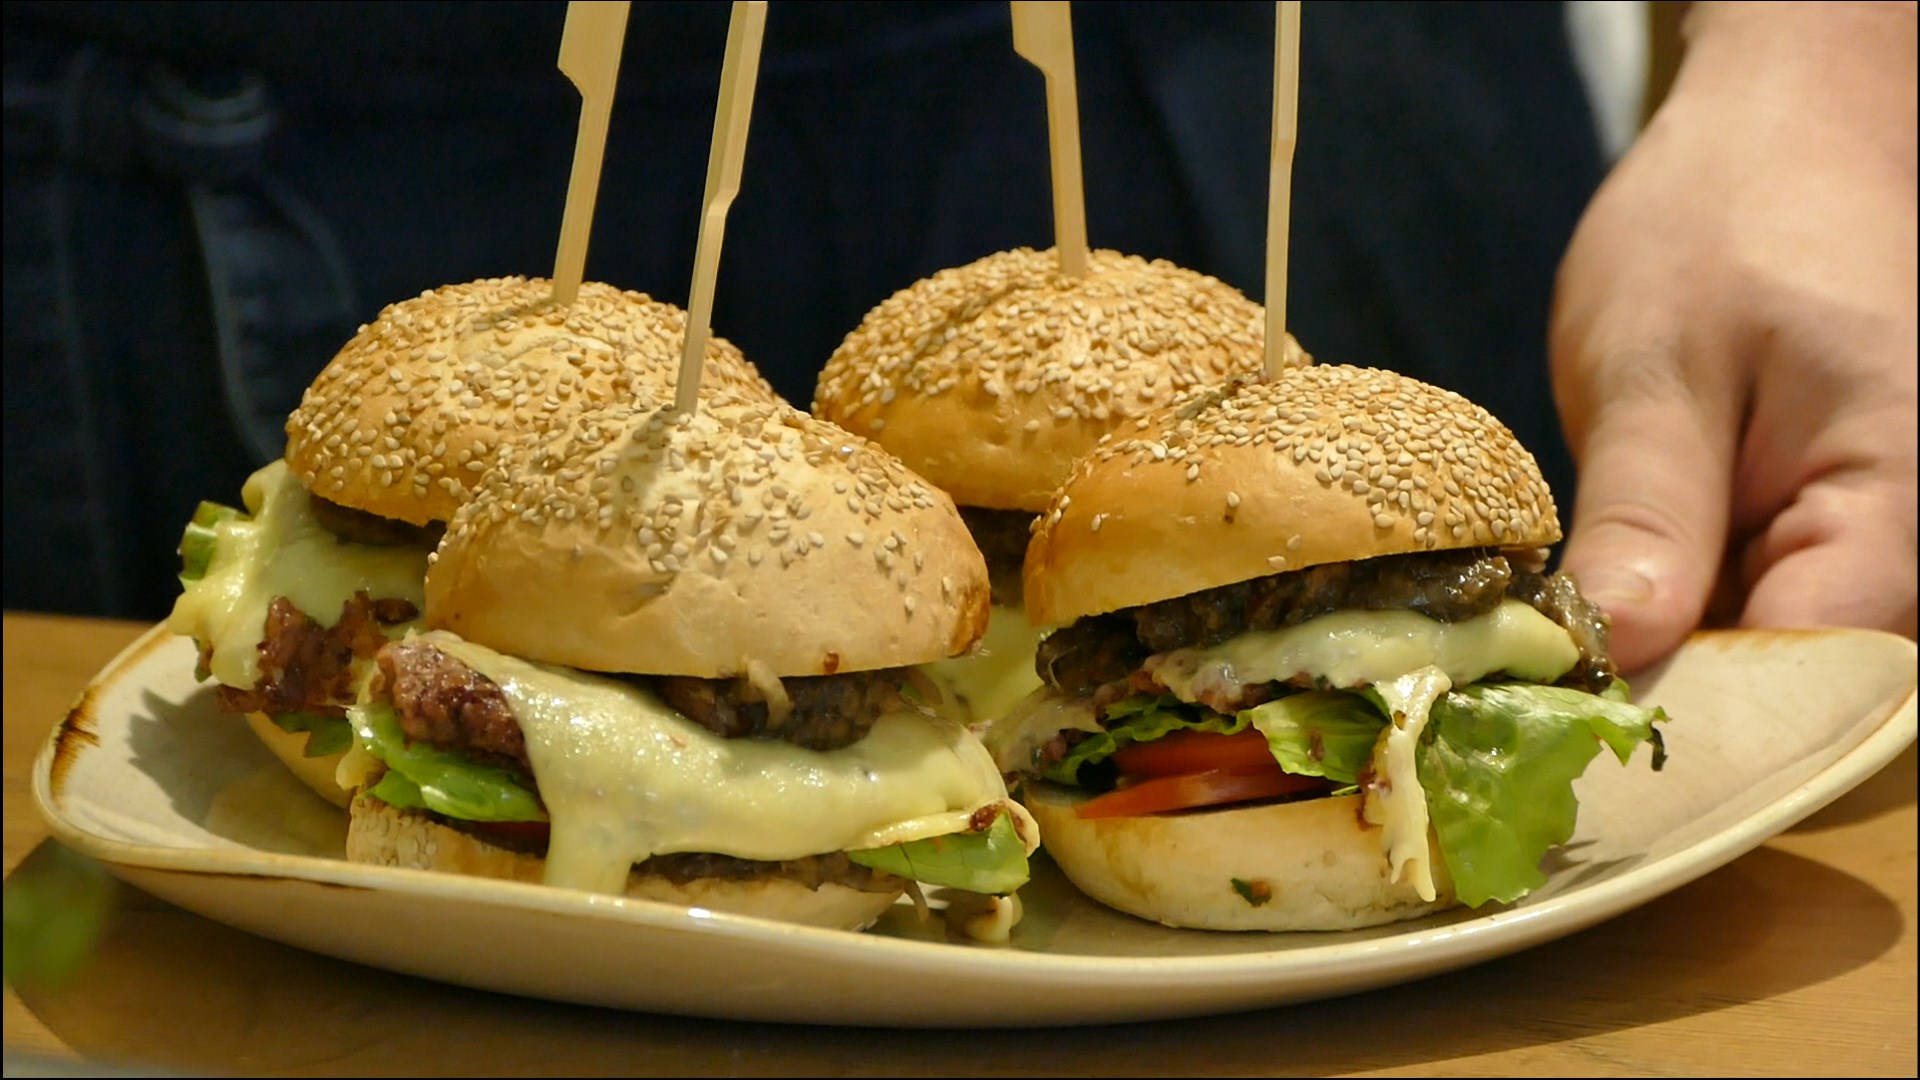 Four small burgers, held together with a wooden stick, are arranged on a plate that is placed on a table by a person.